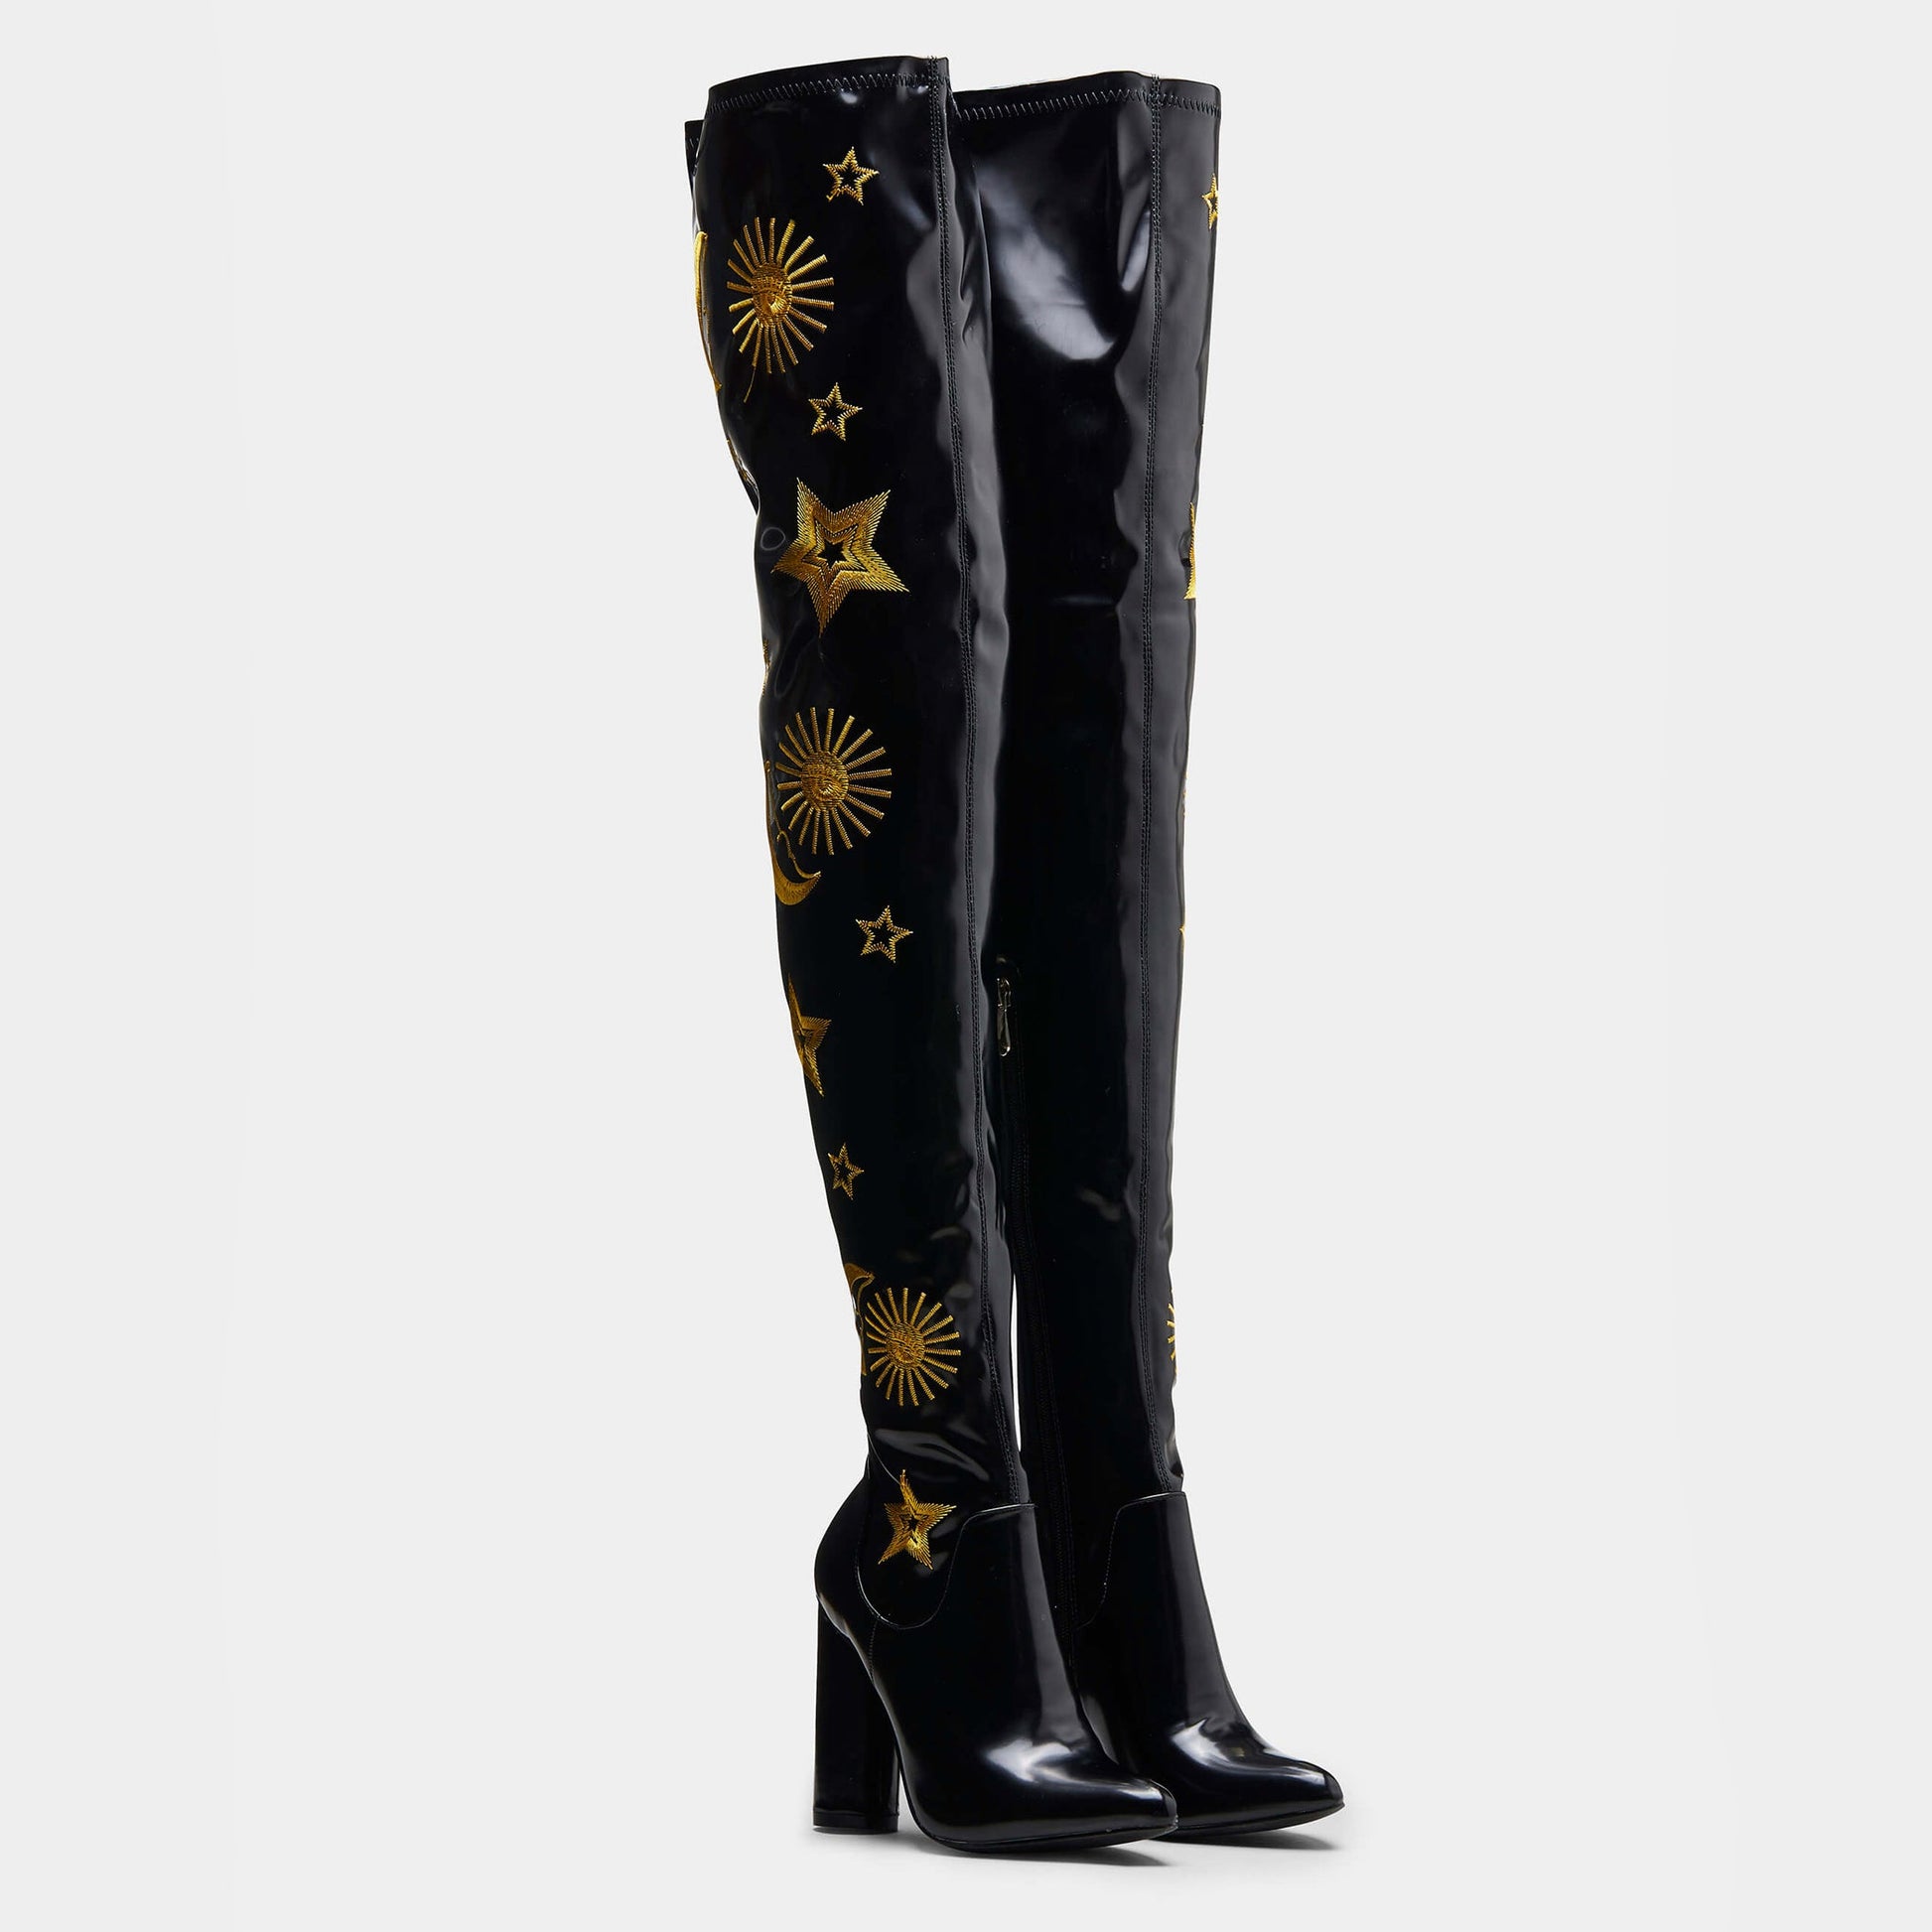 KOI Footwear ASTRID Star and Moon Long Boots Vegan Over The Knee Boots